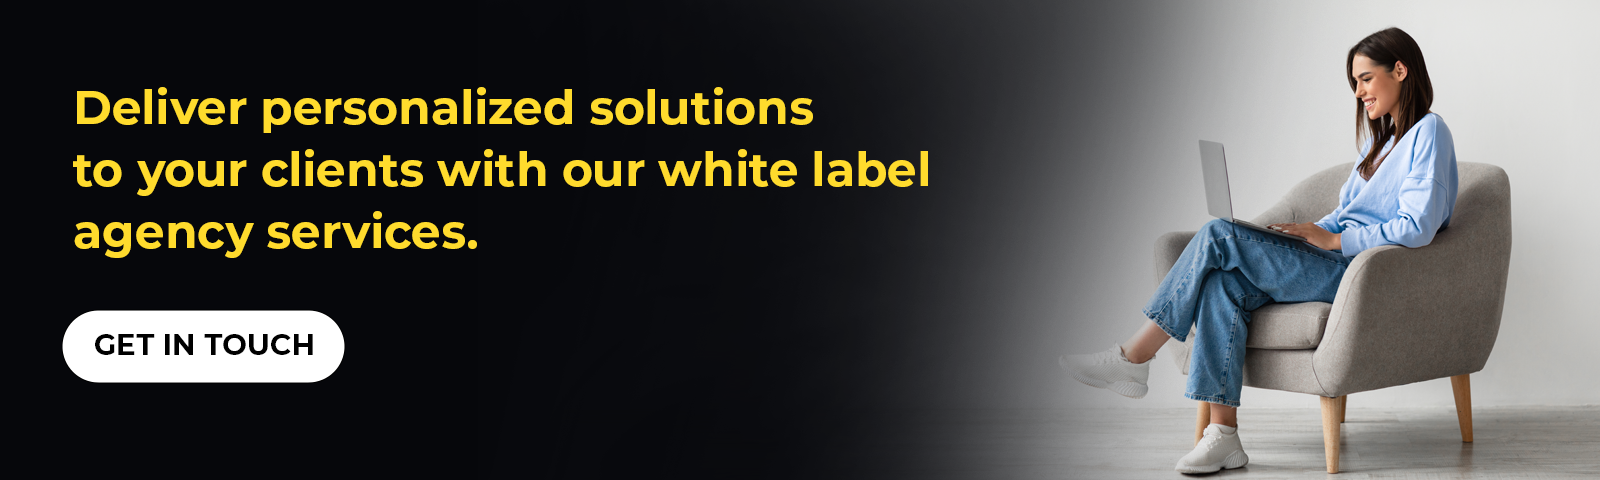 white label solutions